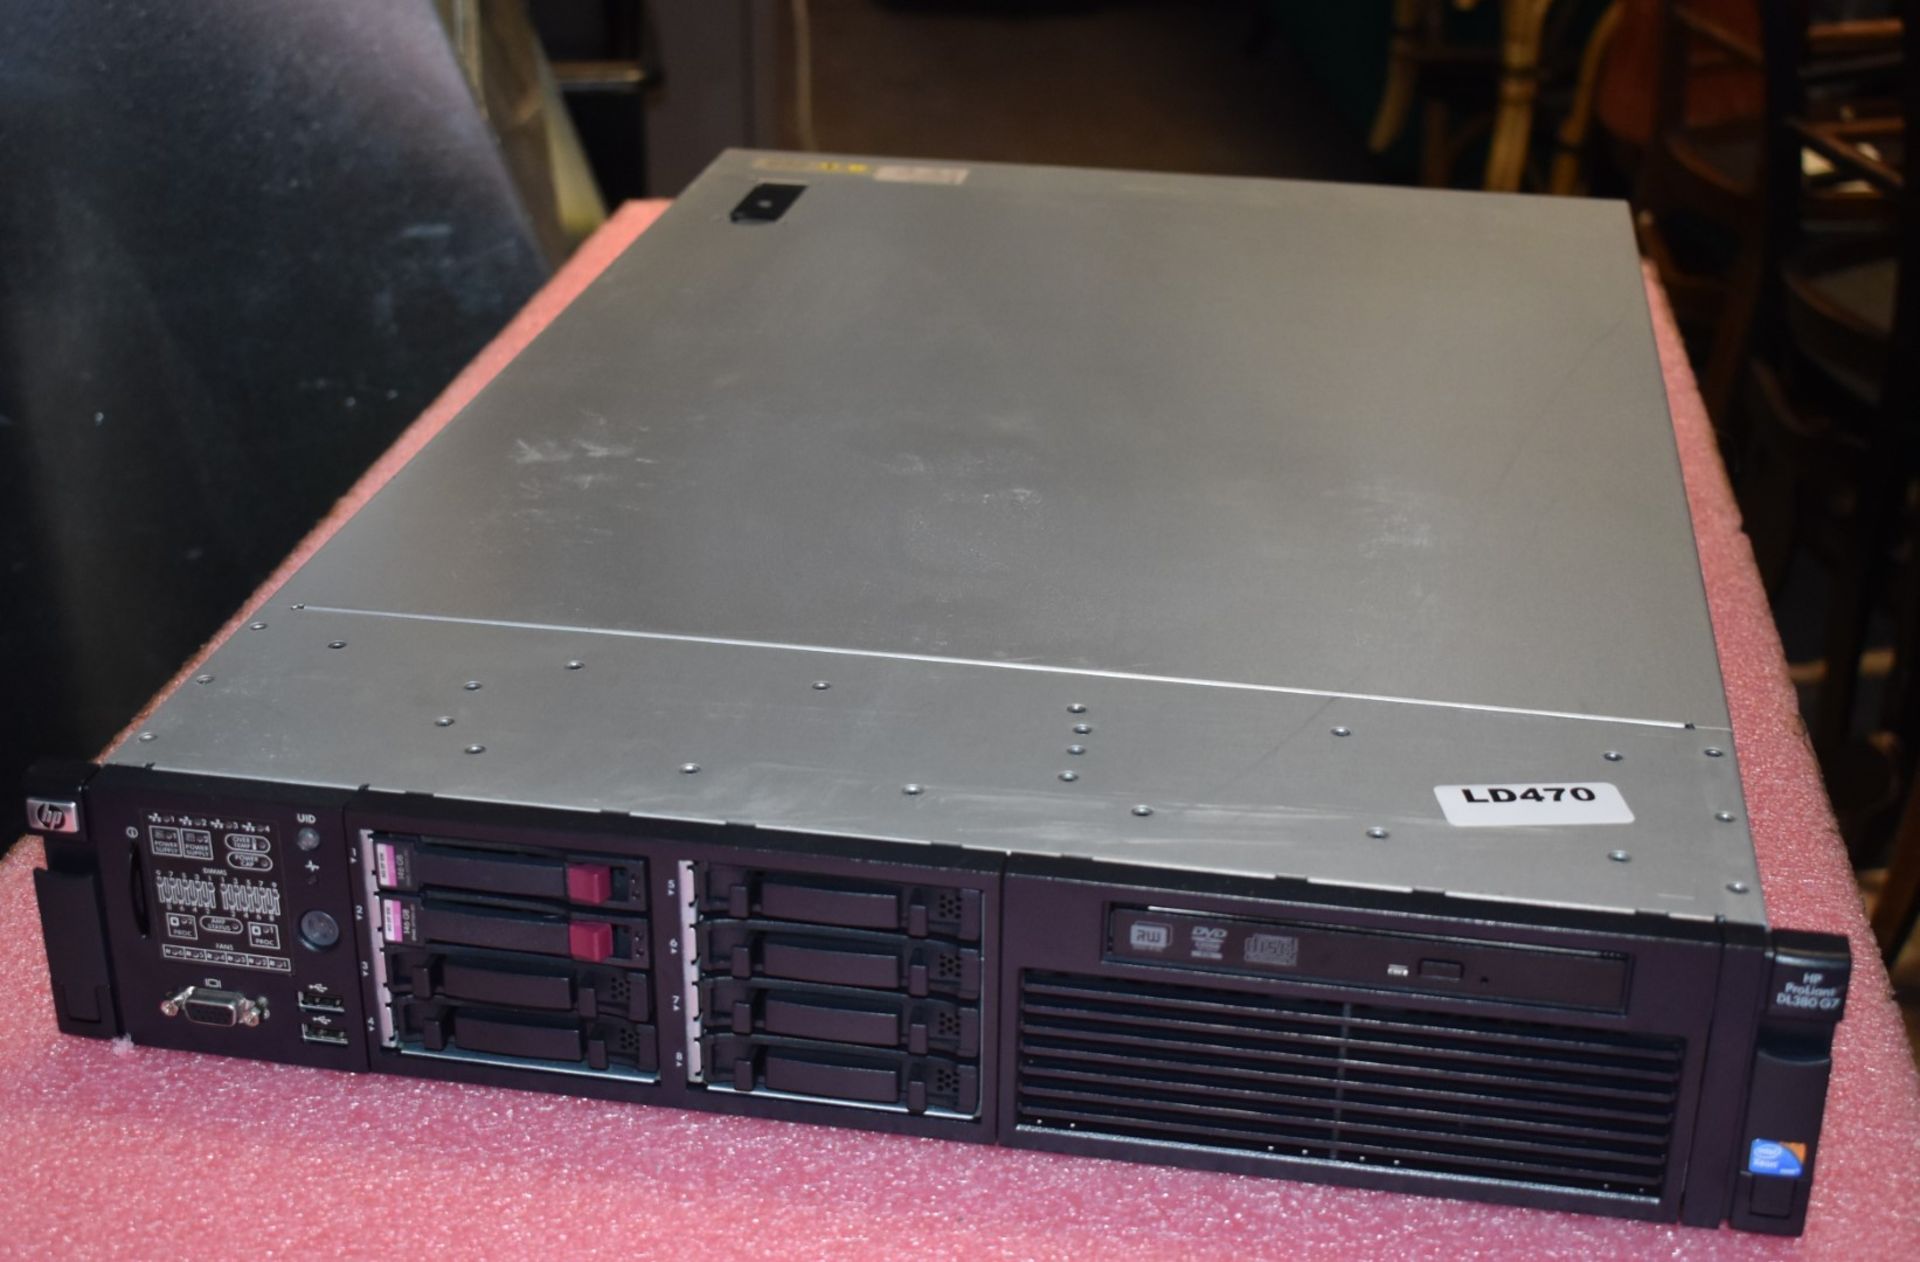 1 x HP ProLiant DL380 G7 Server With 2 x Intel Xeon X5650 Six Core 3.06ghz Processors and 84gb Ram - - Image 6 of 7